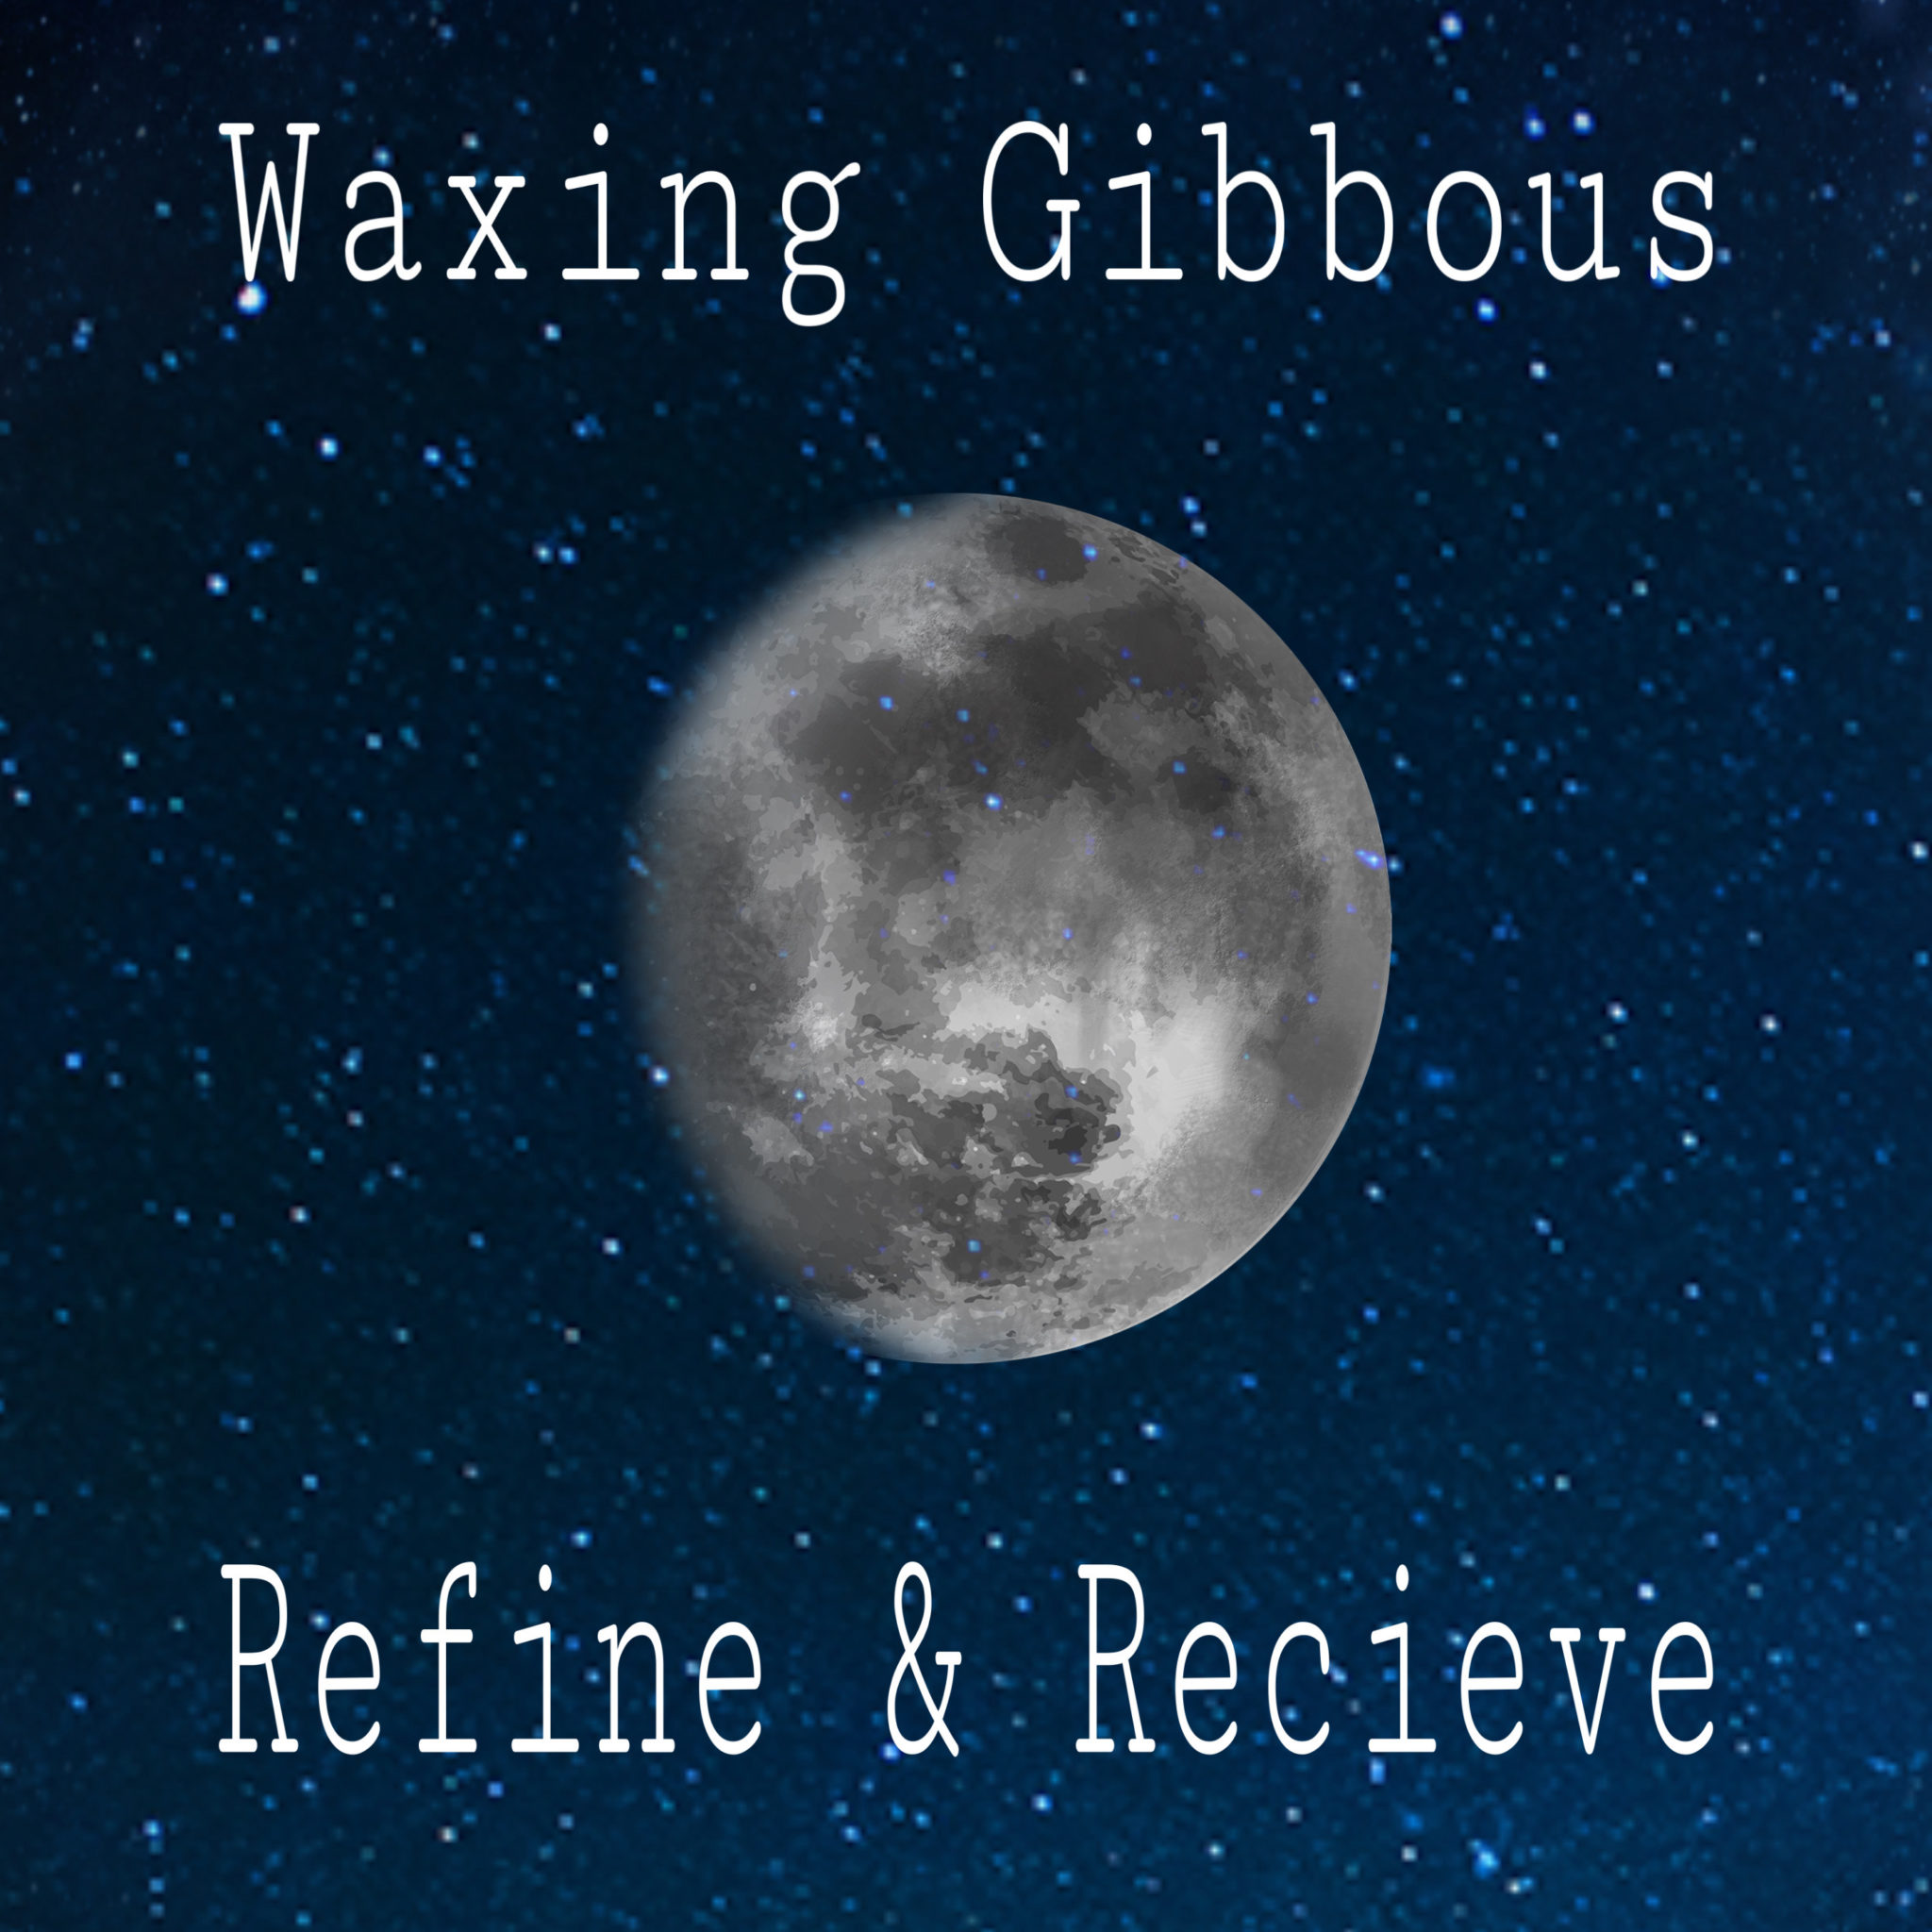 How to Manifest with the Moon's Phases - Waxing Gibbous